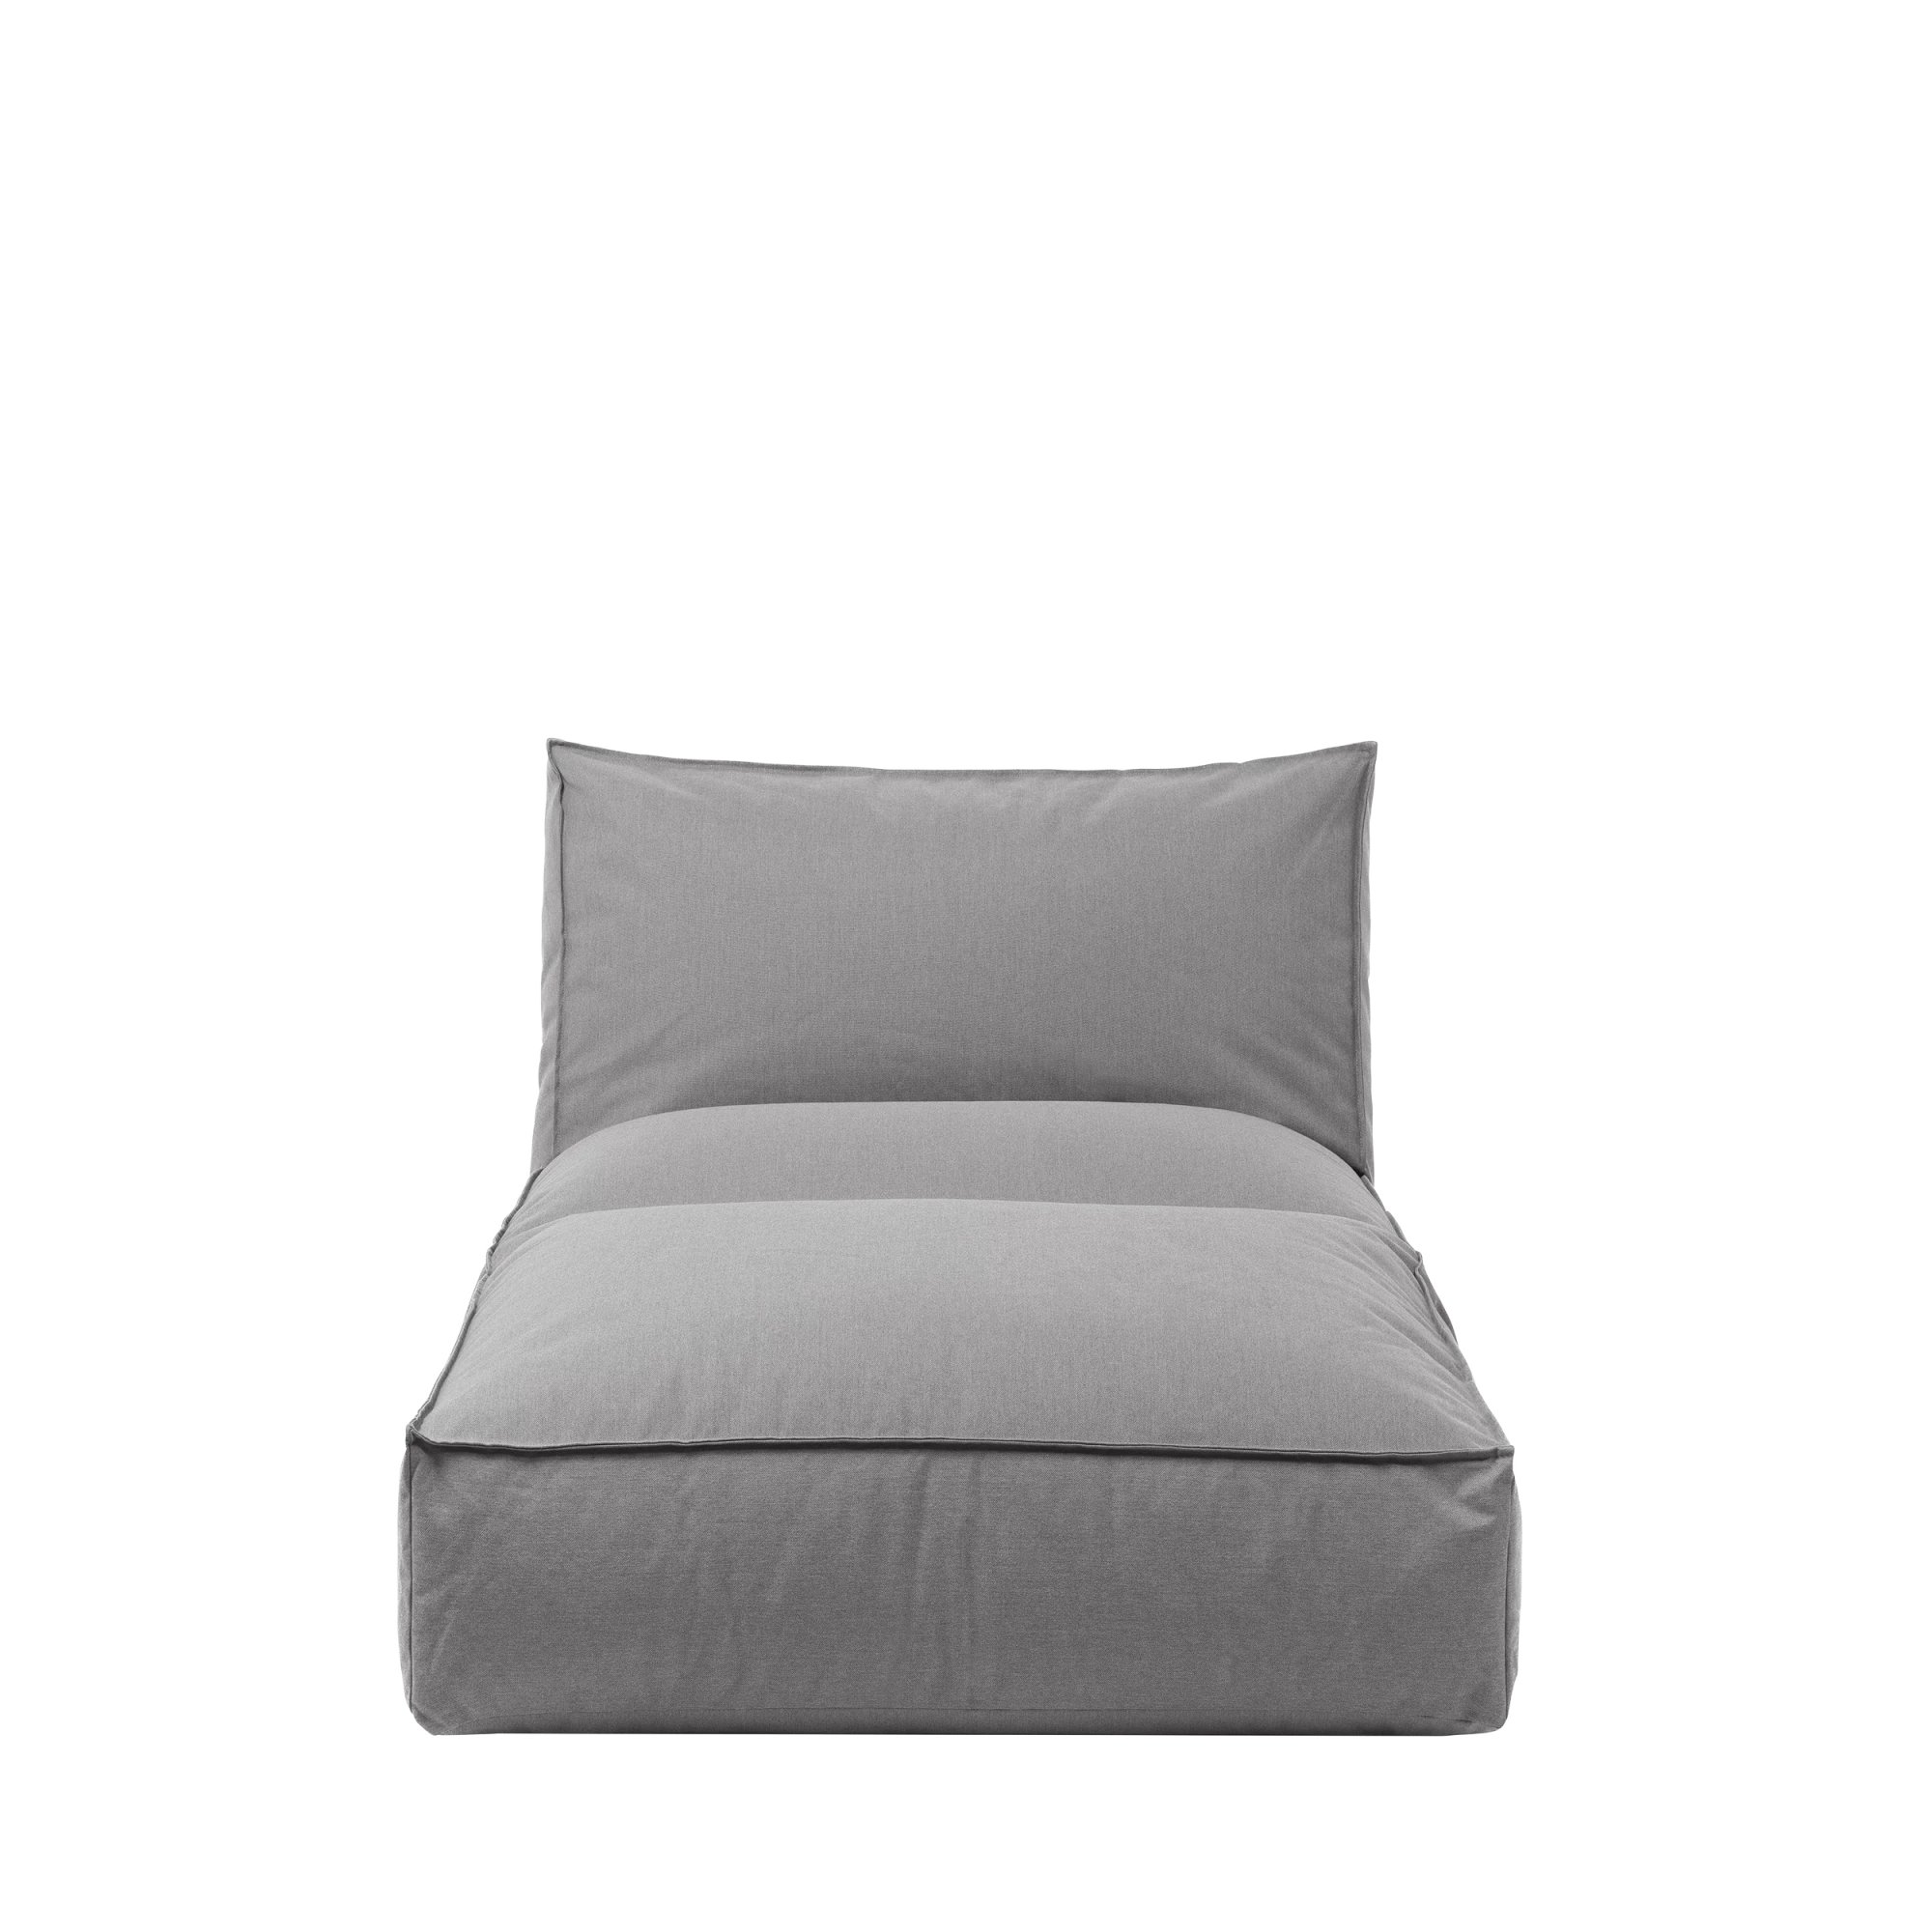 BLOMUS // STAY - OUTDOOR BED S | 80 x 190 cm